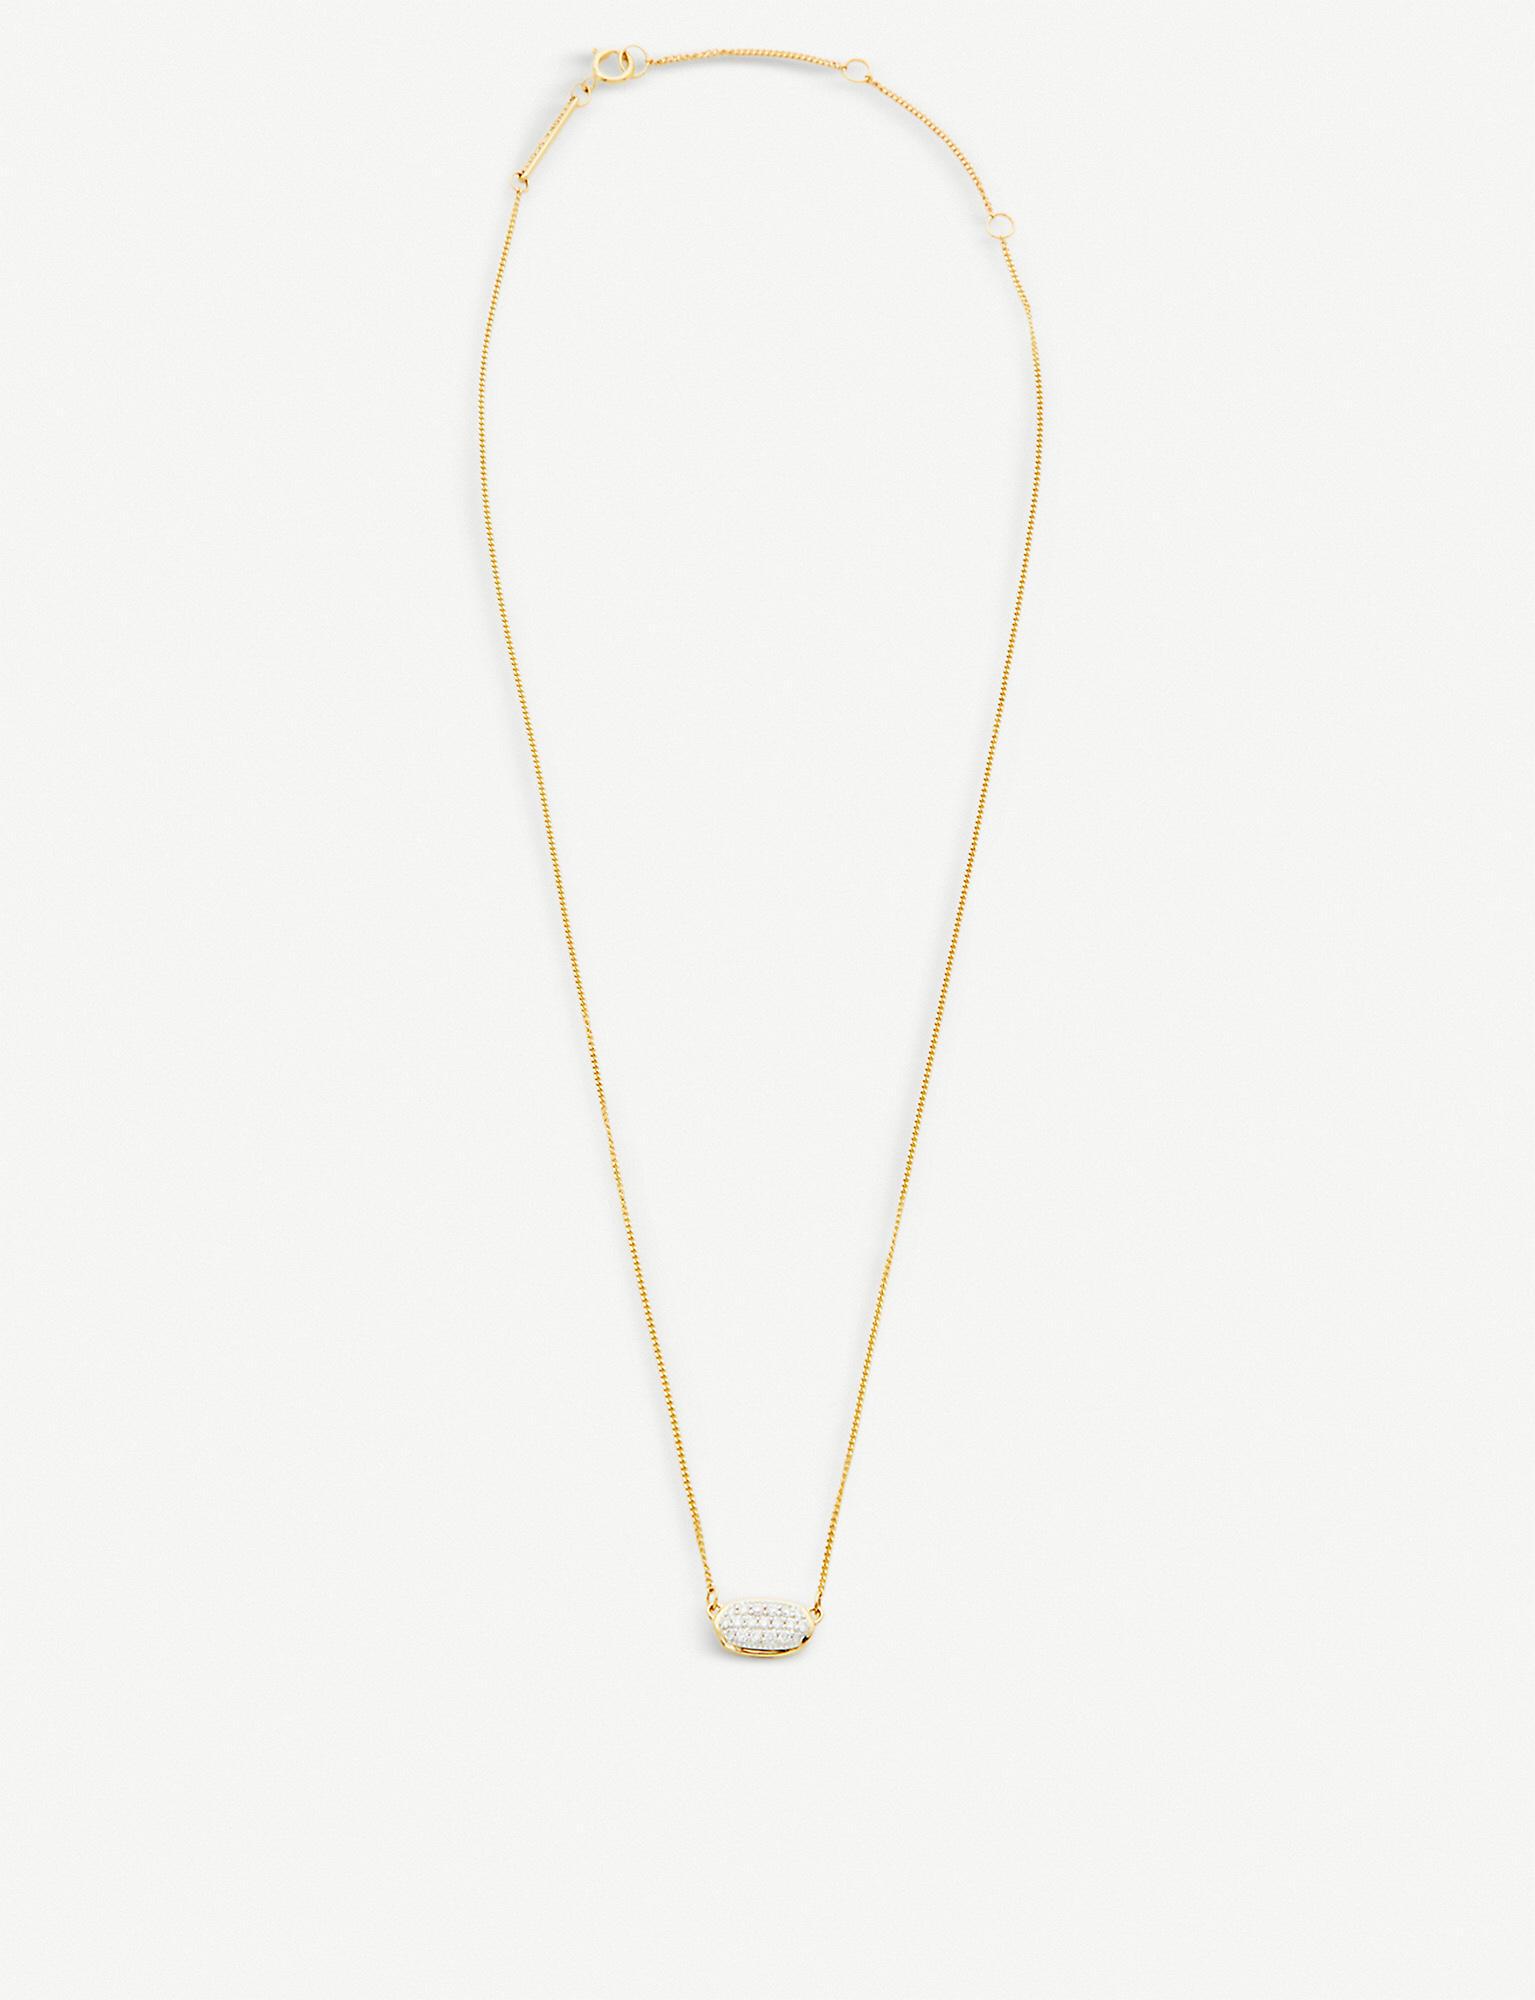 Kendra Scott Elisa 14ct Gold And Pave Diamond Necklace in Metallic - Lyst